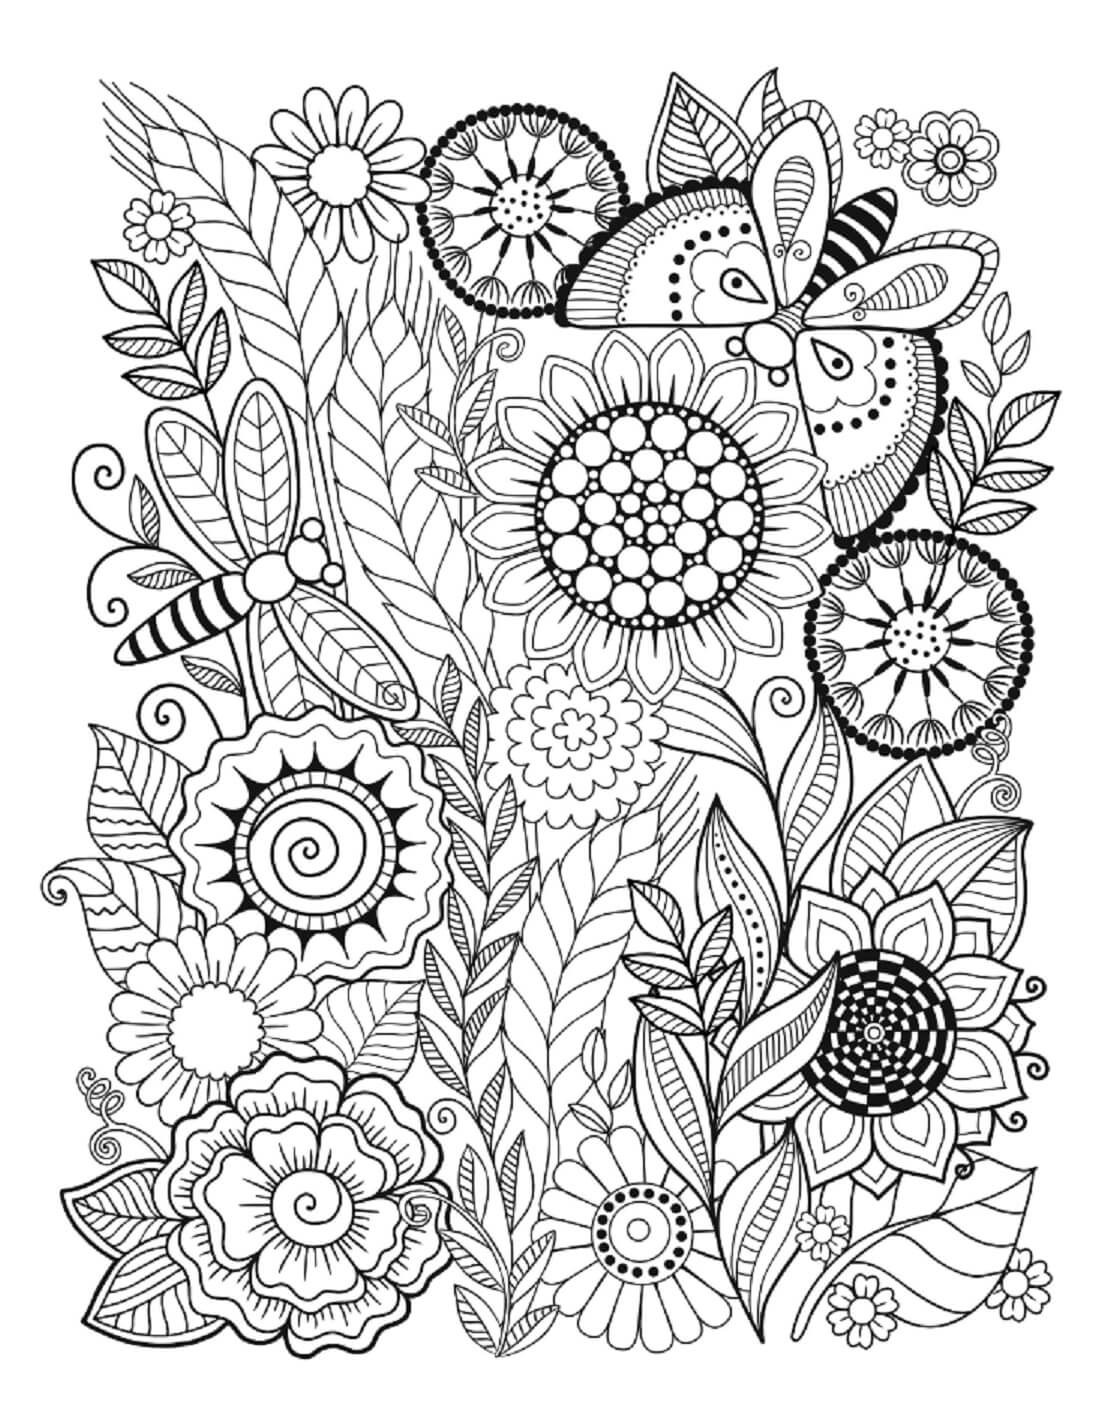 Mandala Insects with Flowers and Leaves in Summer Coloring Page Mandalas